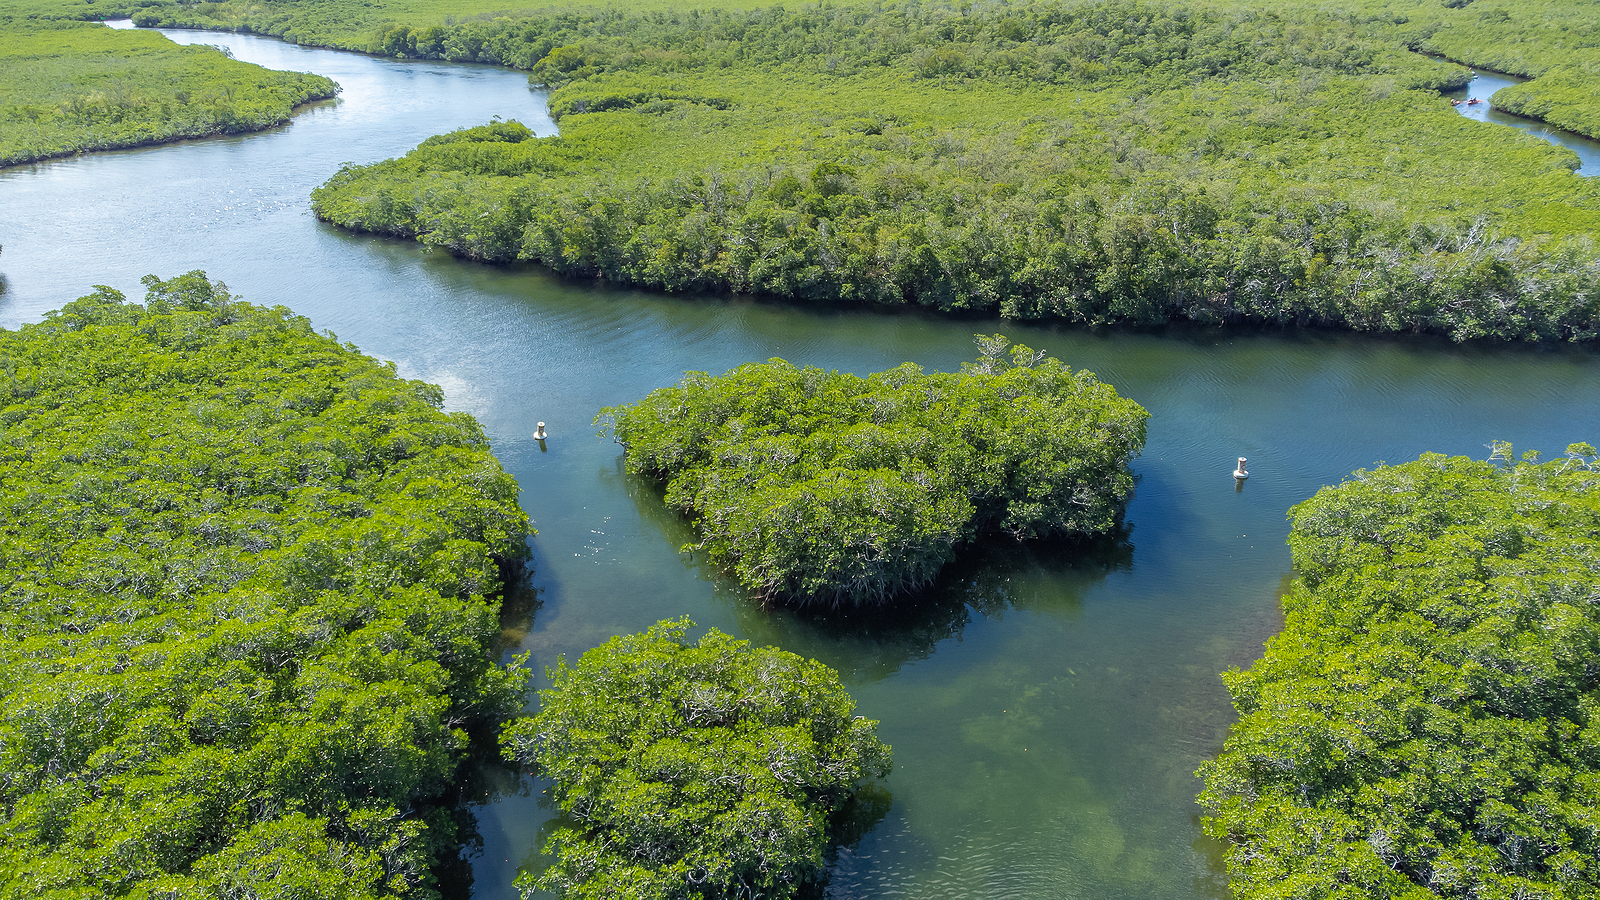 Aerial view of Key Largo waterways and creeks, accessible by boat